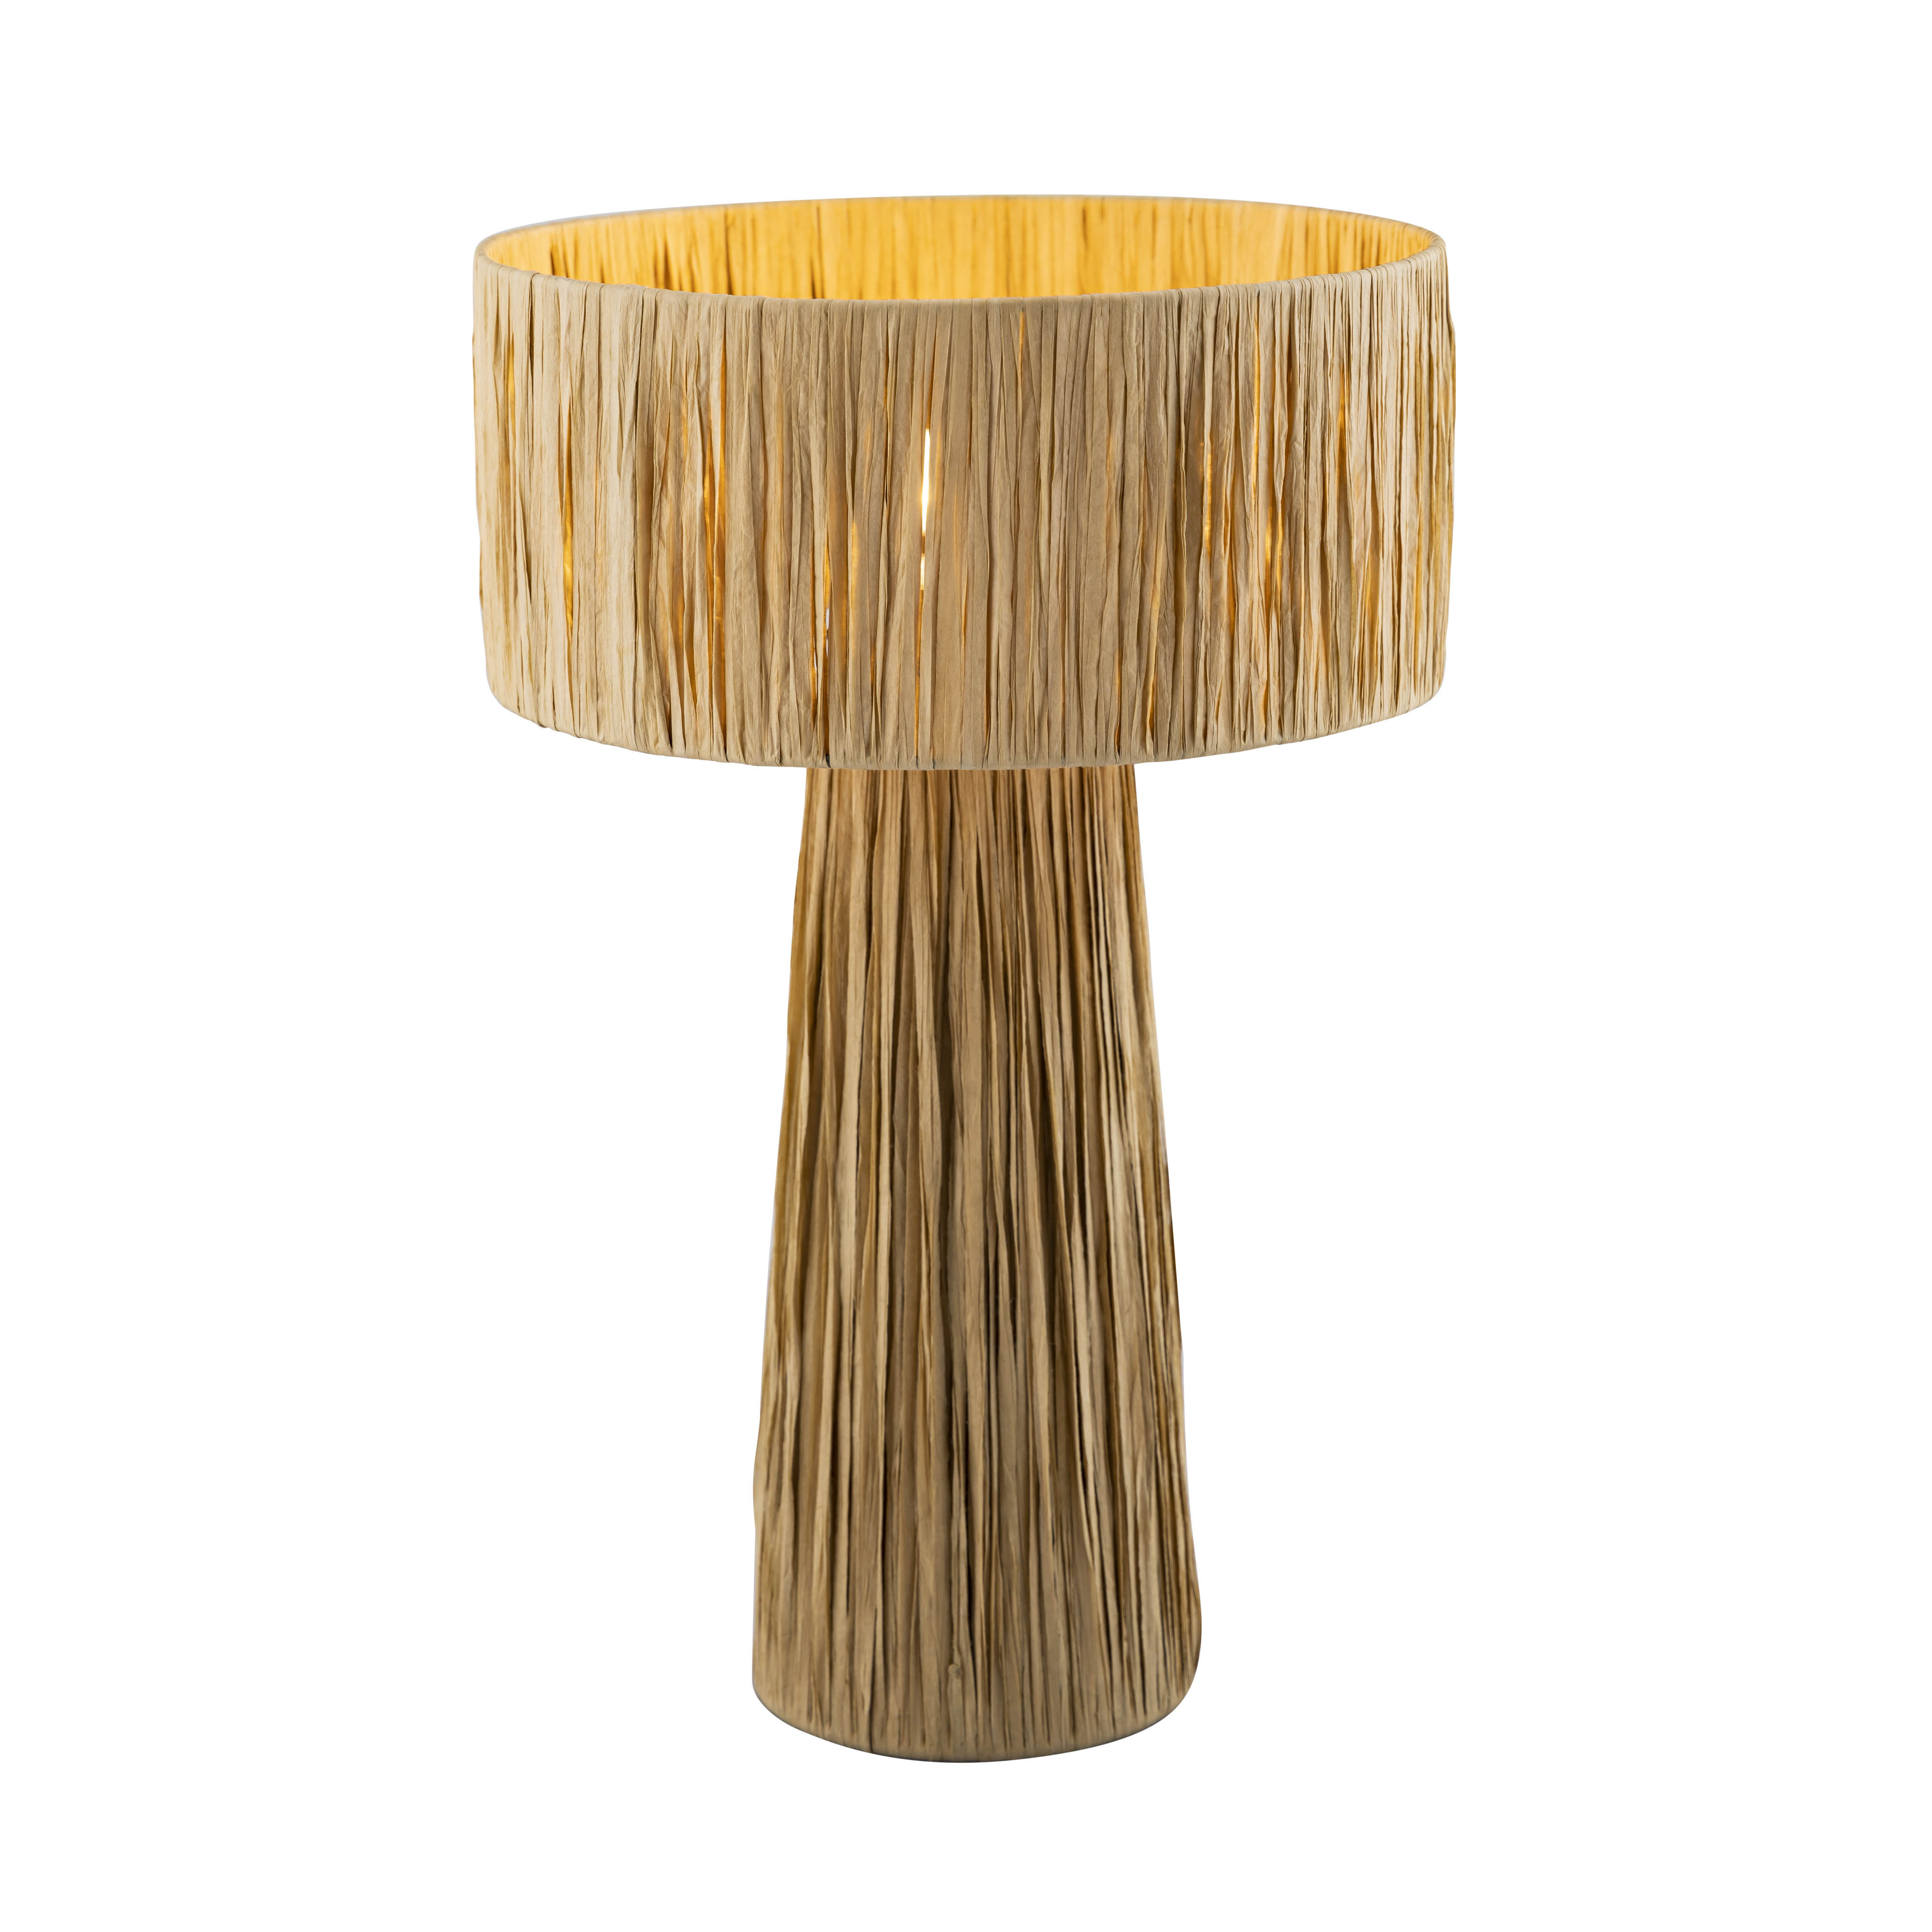 Shelby Rafia Natural Table Lamp - image 4 of 8